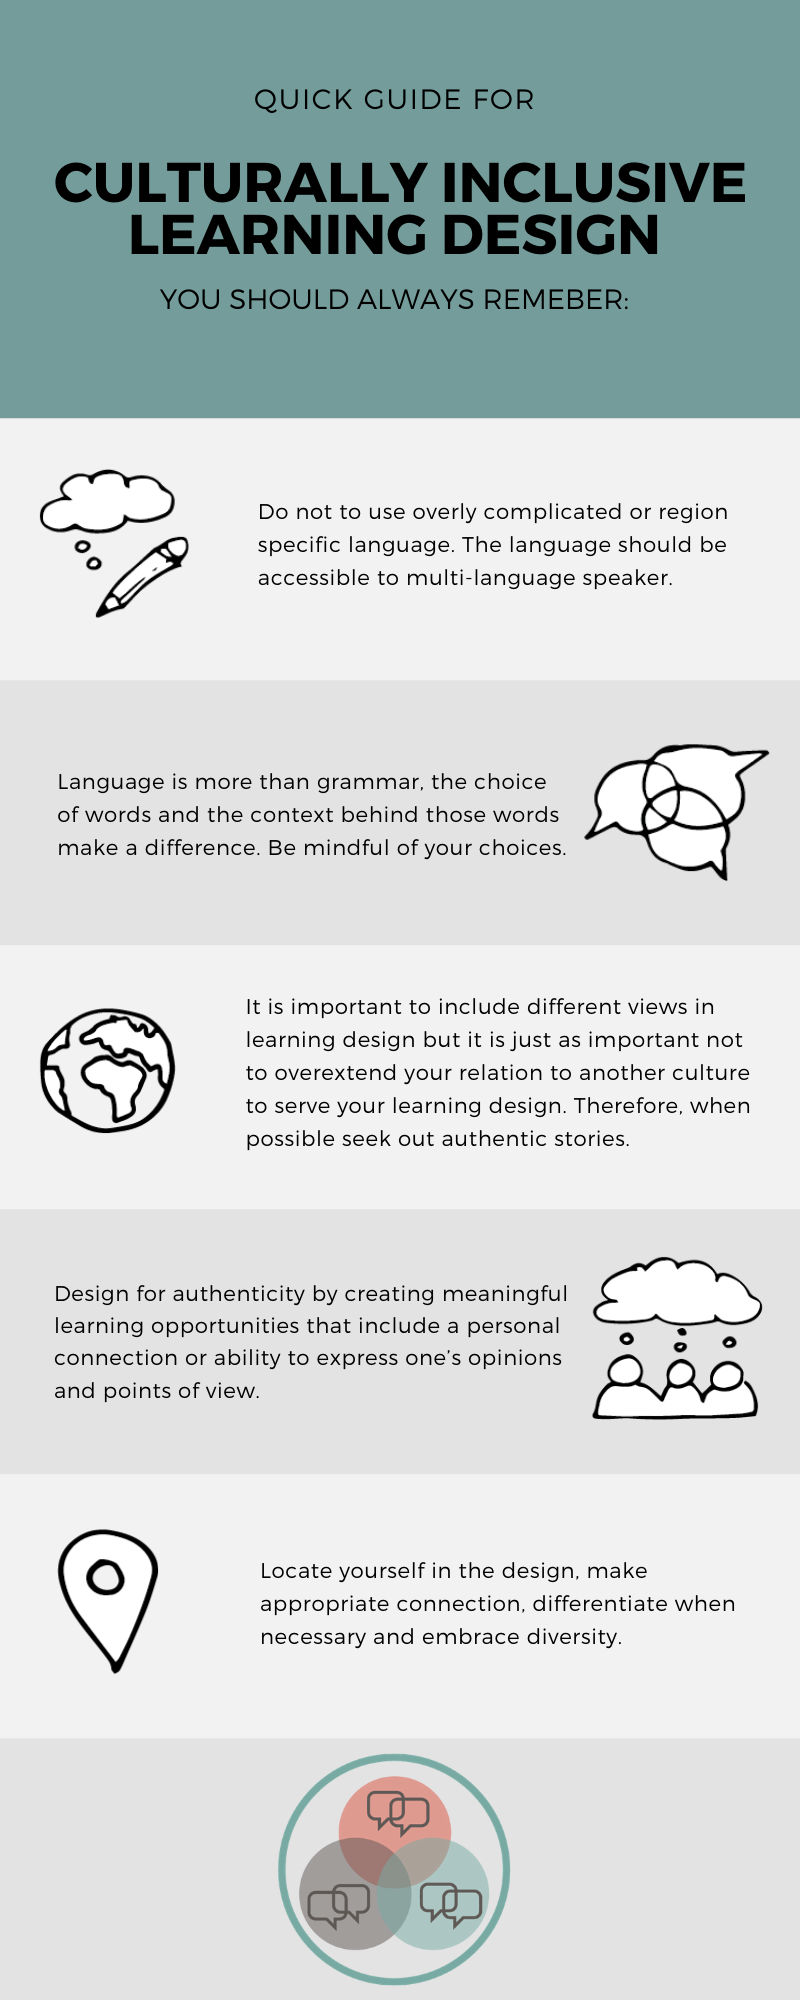 Infographic on steps to remember when designing for cultural inclusivity.